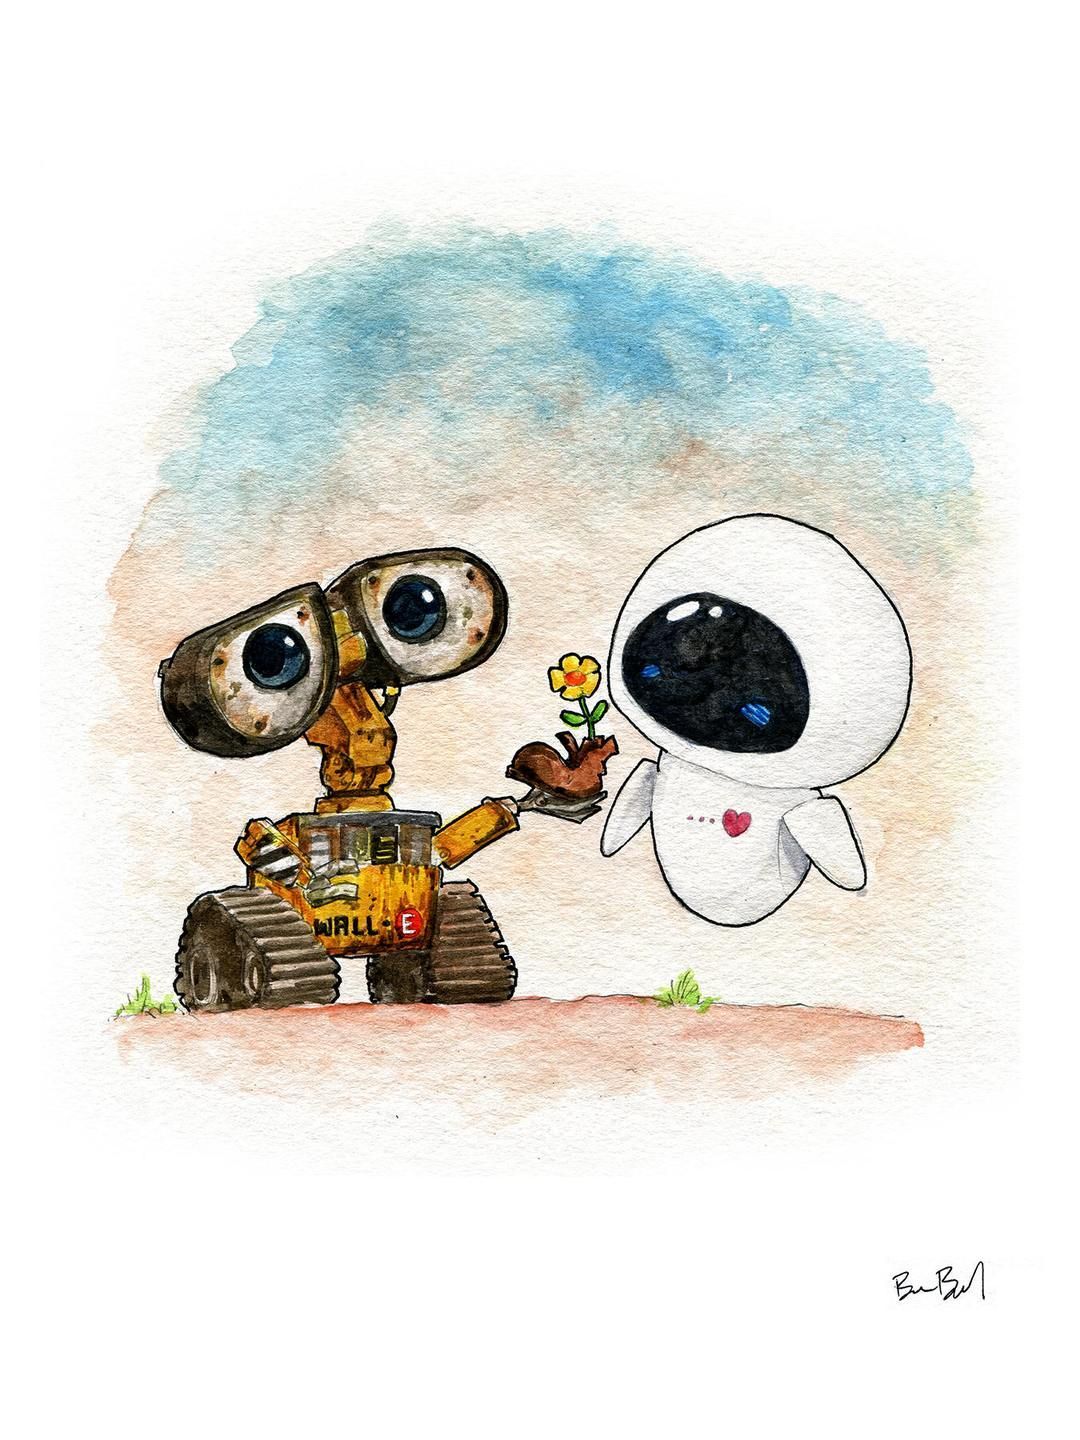 Wall-E and EVE Inspired Watercolor Print -   9 diet Wallpaper cartoon ideas